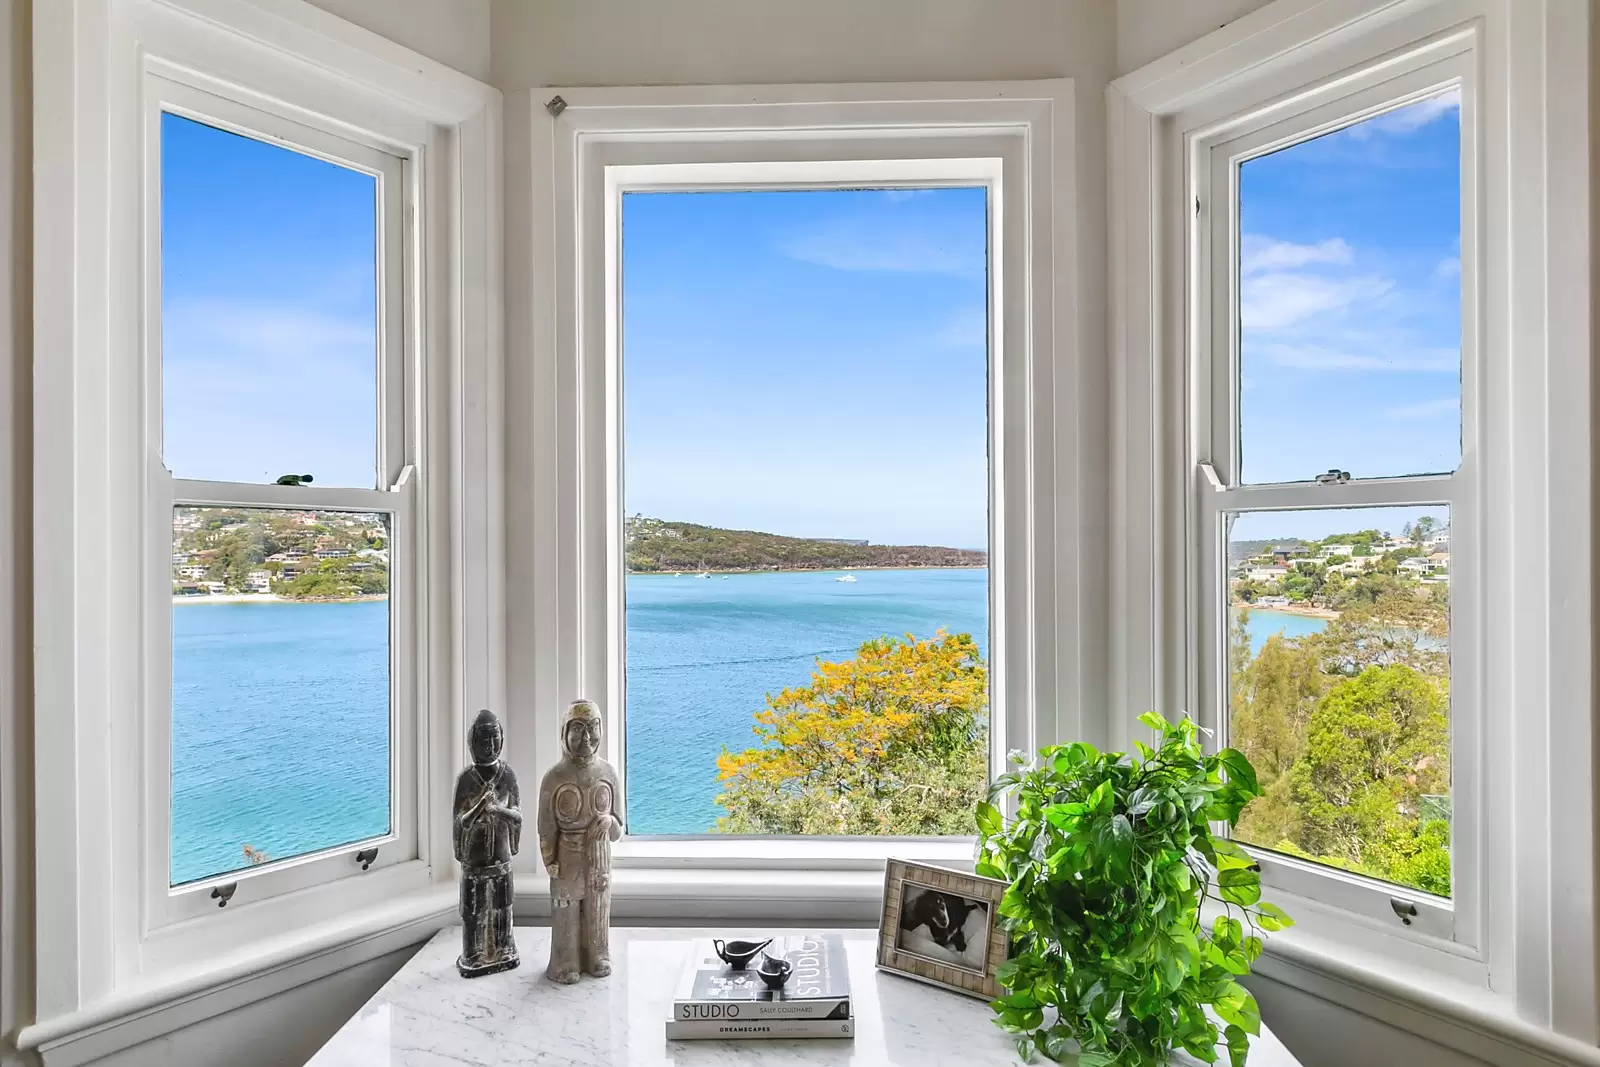 Photo #13: 51 Parriwi Road, Mosman - Sold by Sydney Sotheby's International Realty